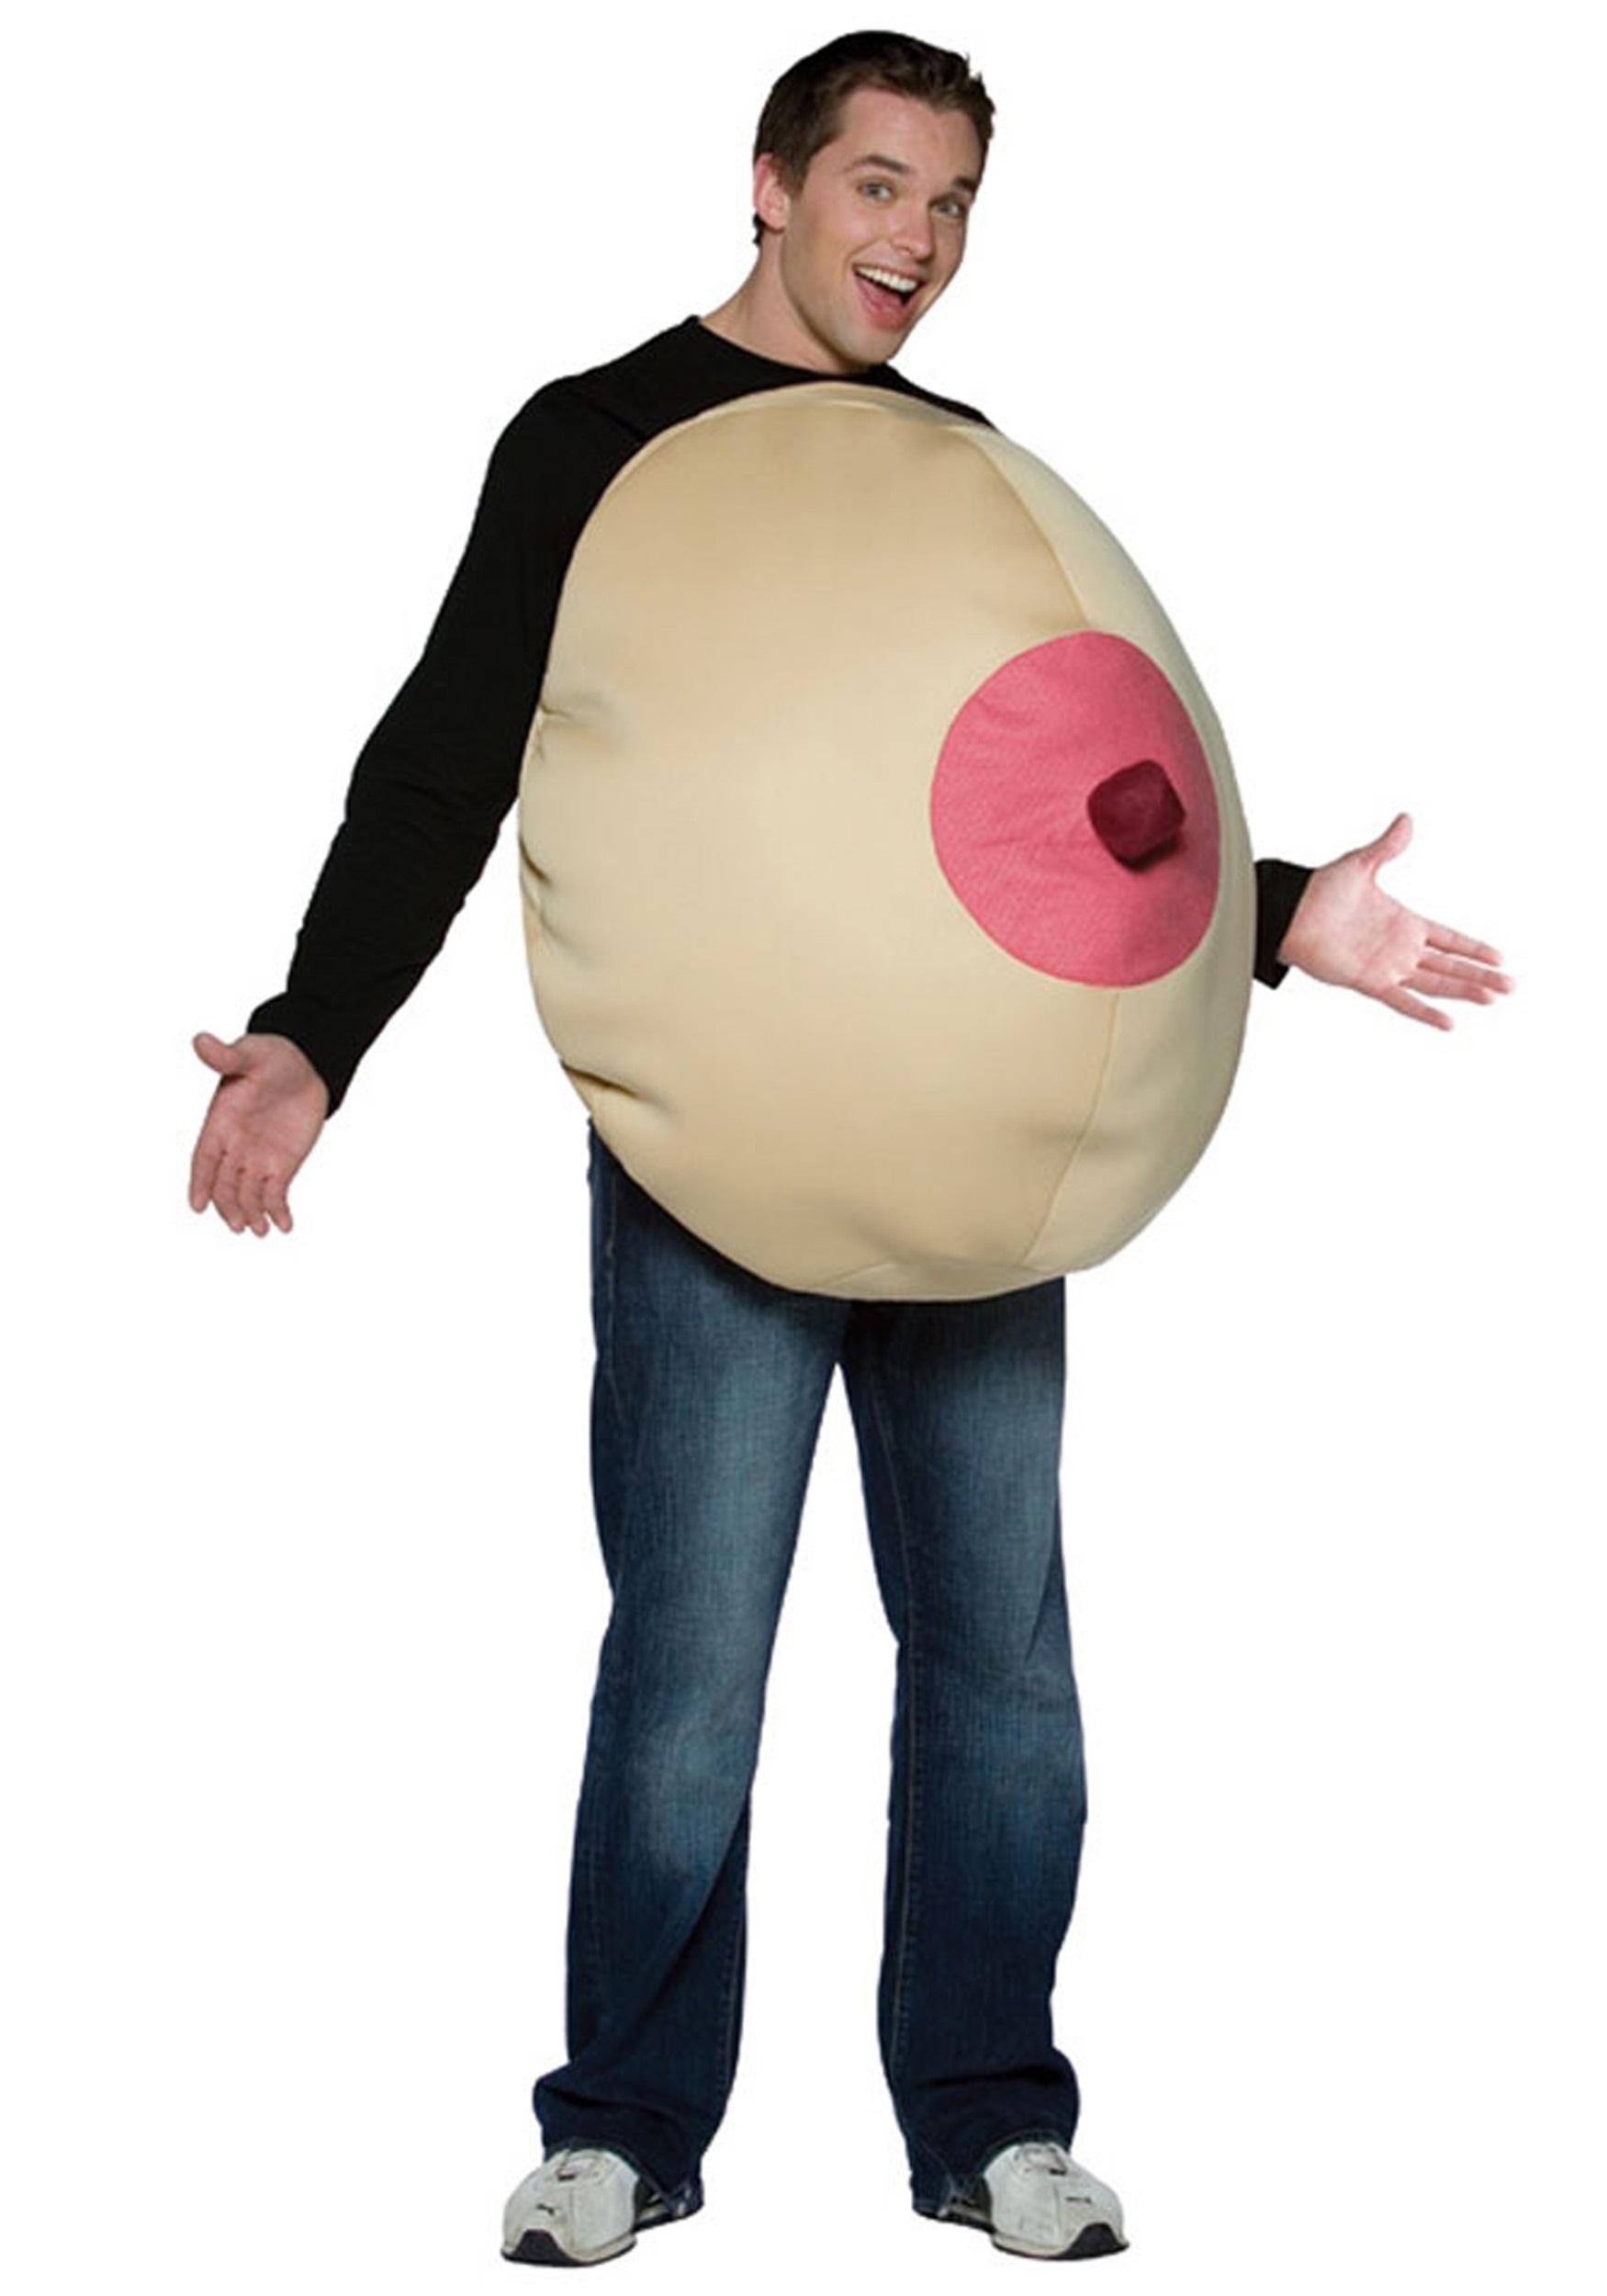 https://images.halloweencostumes.ca/products/7998/1-1/giant-boob-costume.jpg